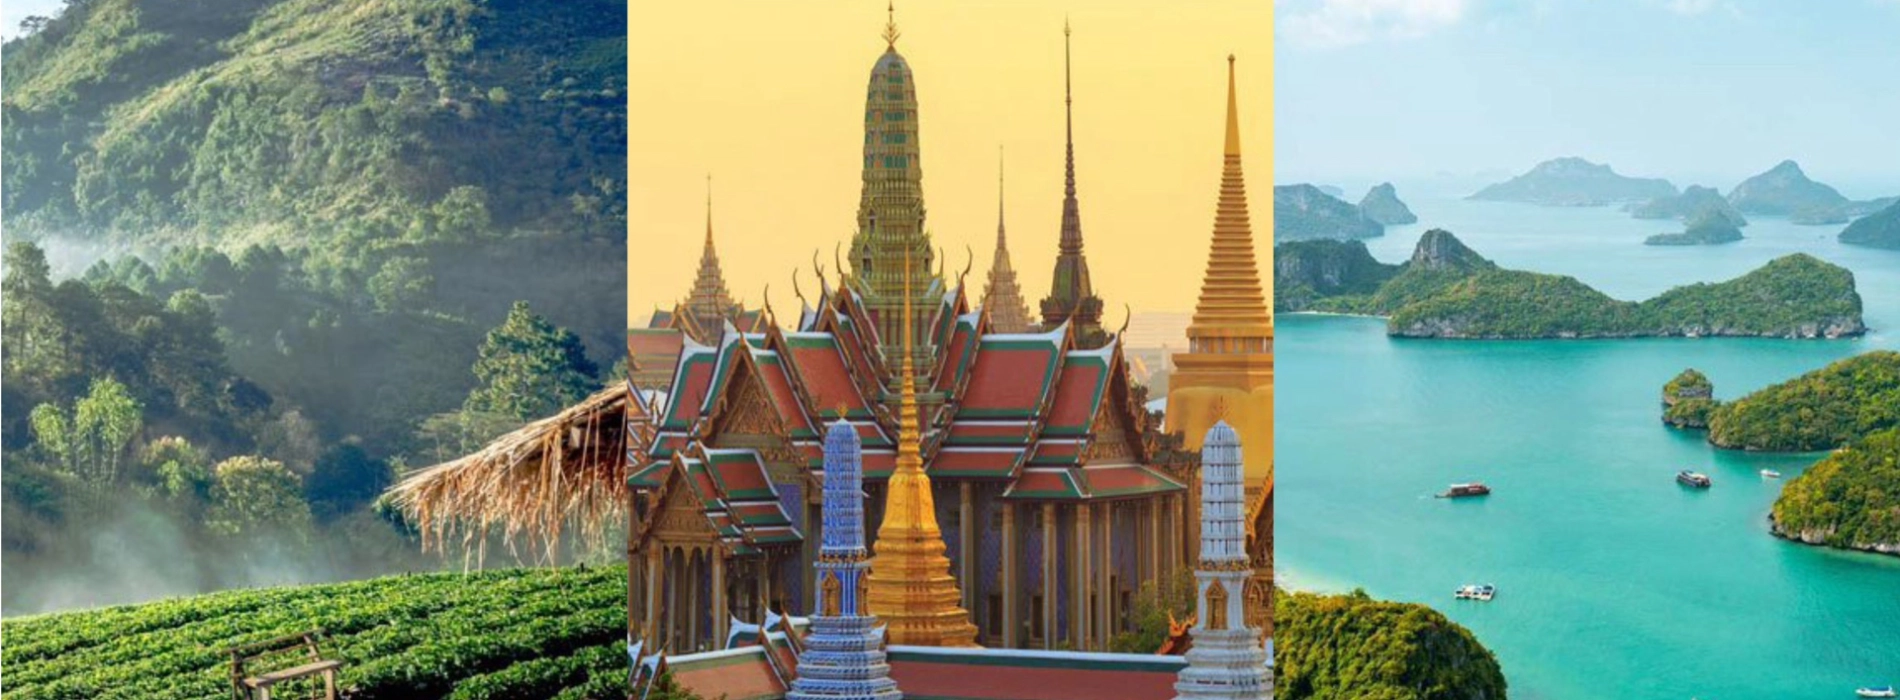 Best attraction for 3 regions of Thailand 7 days tour